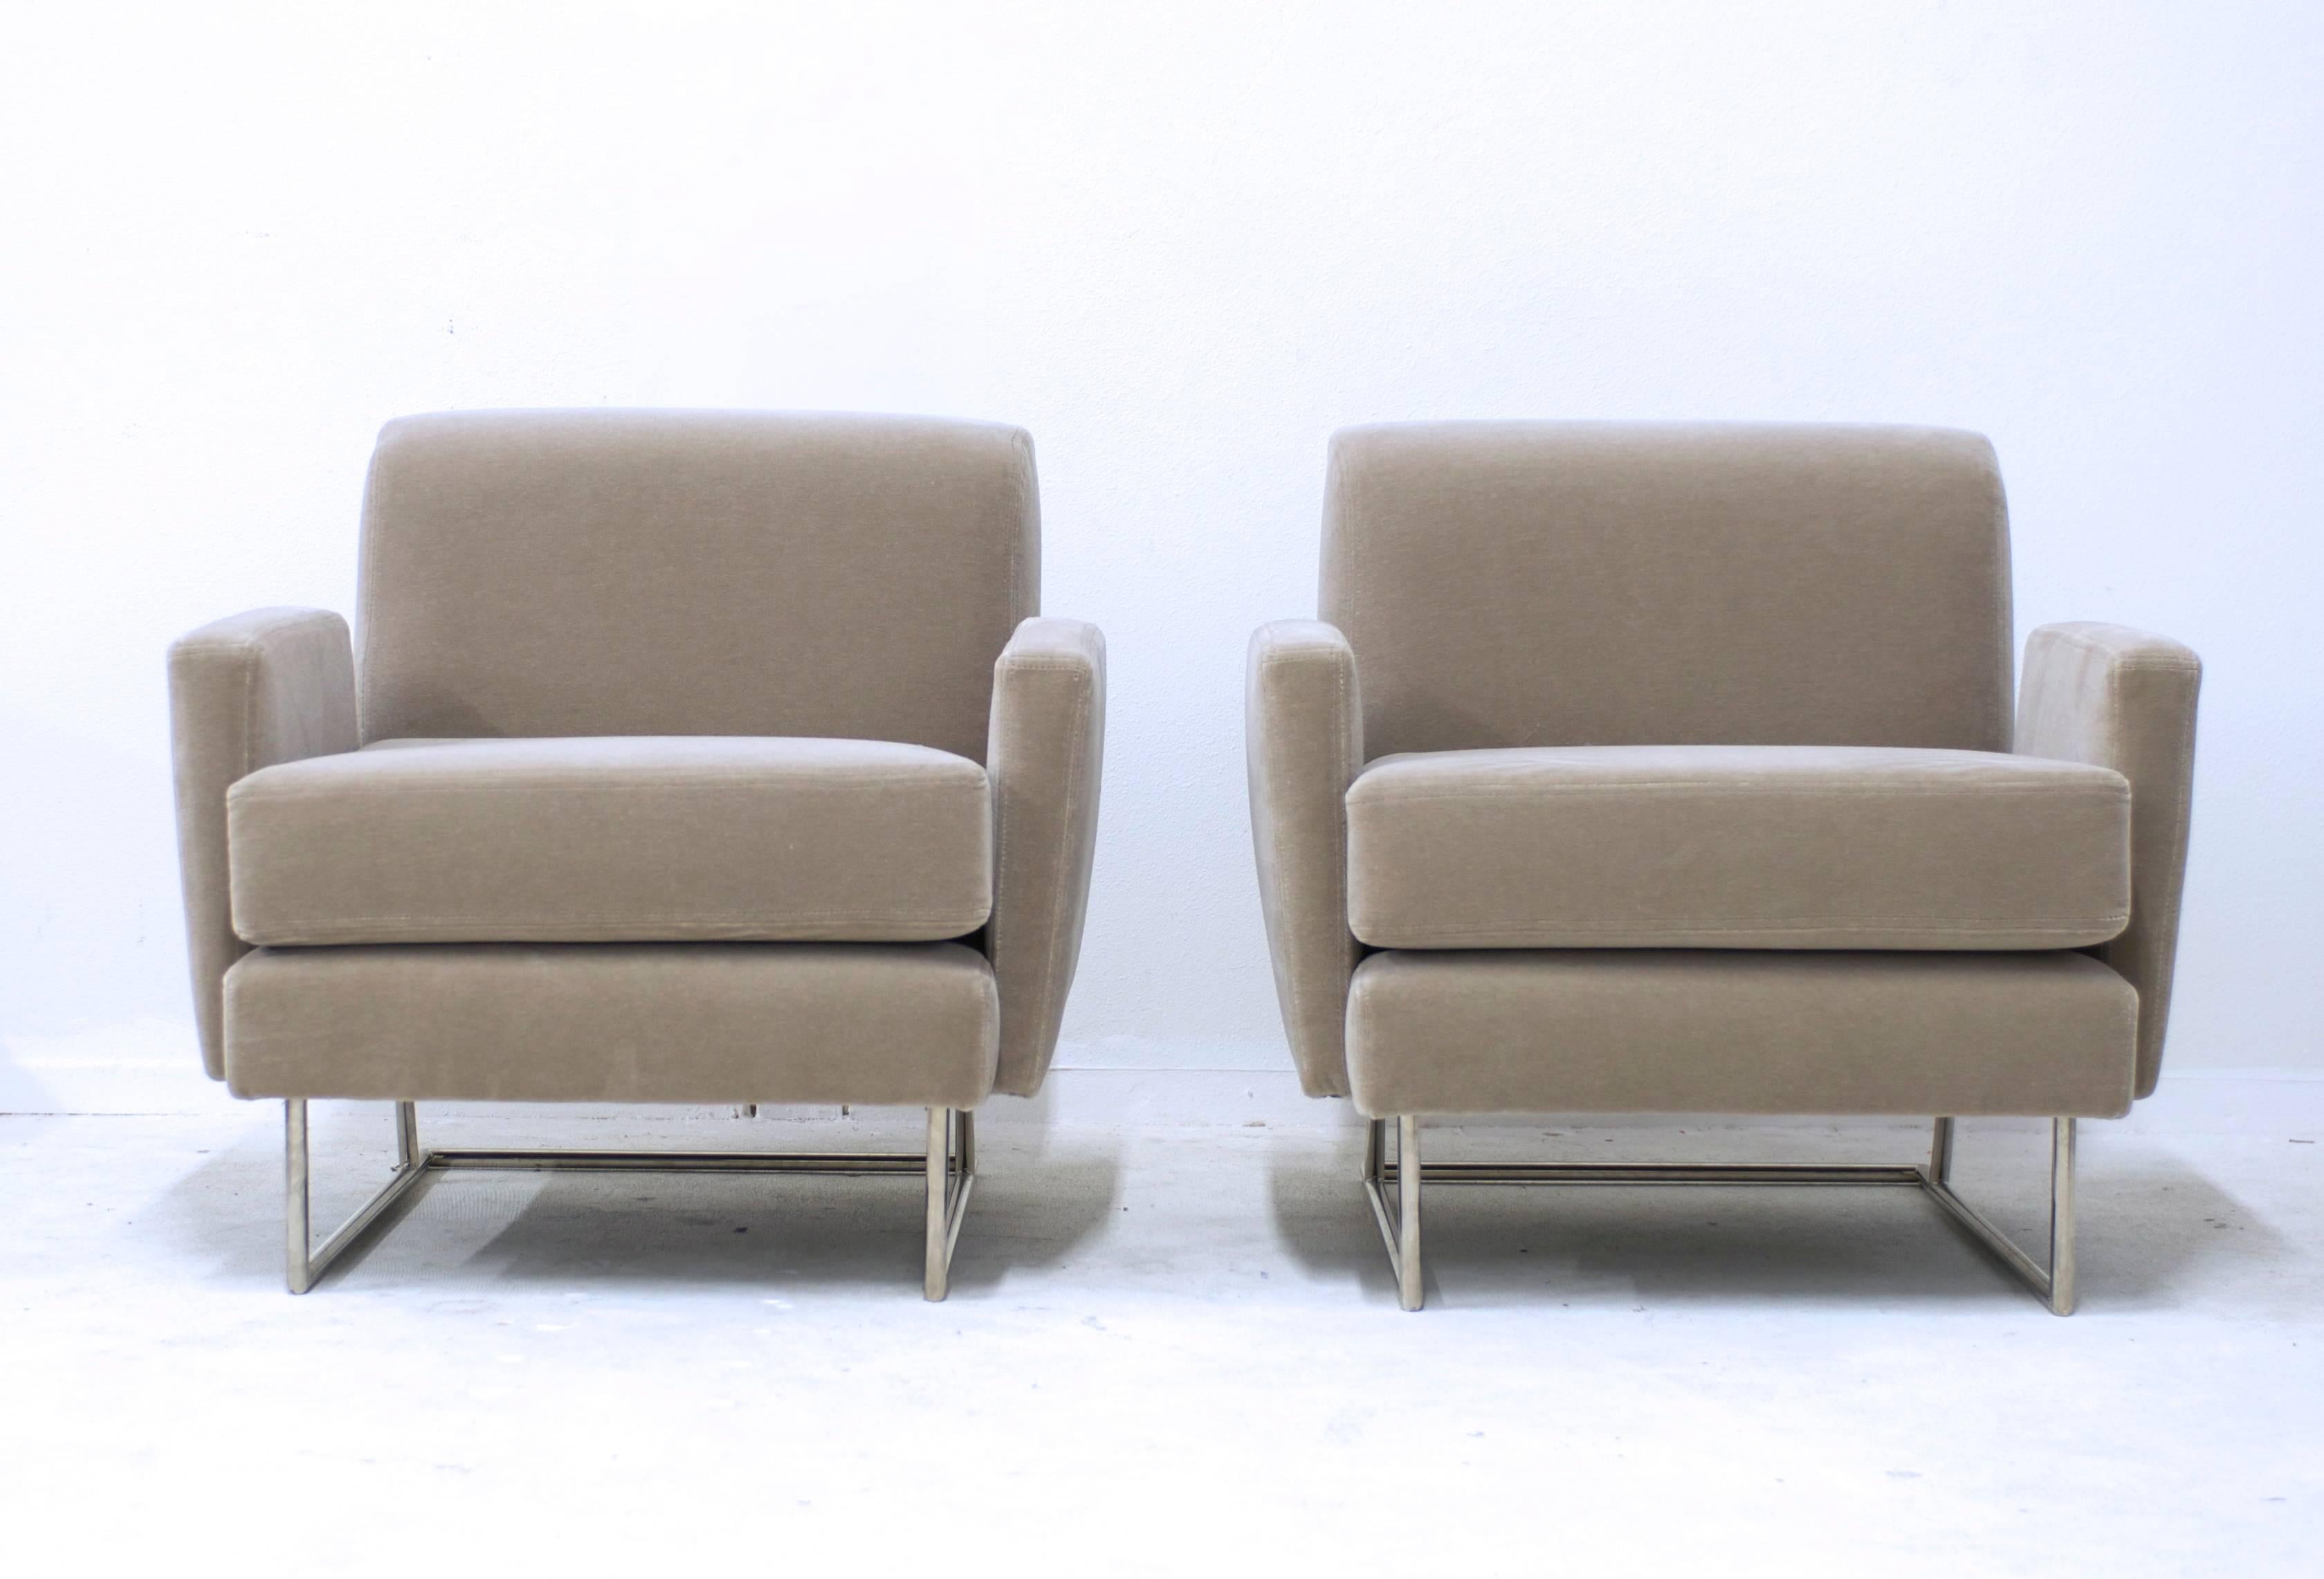 American Pair of Lounge Chairs in Mohair with Thin Polished Steel Base